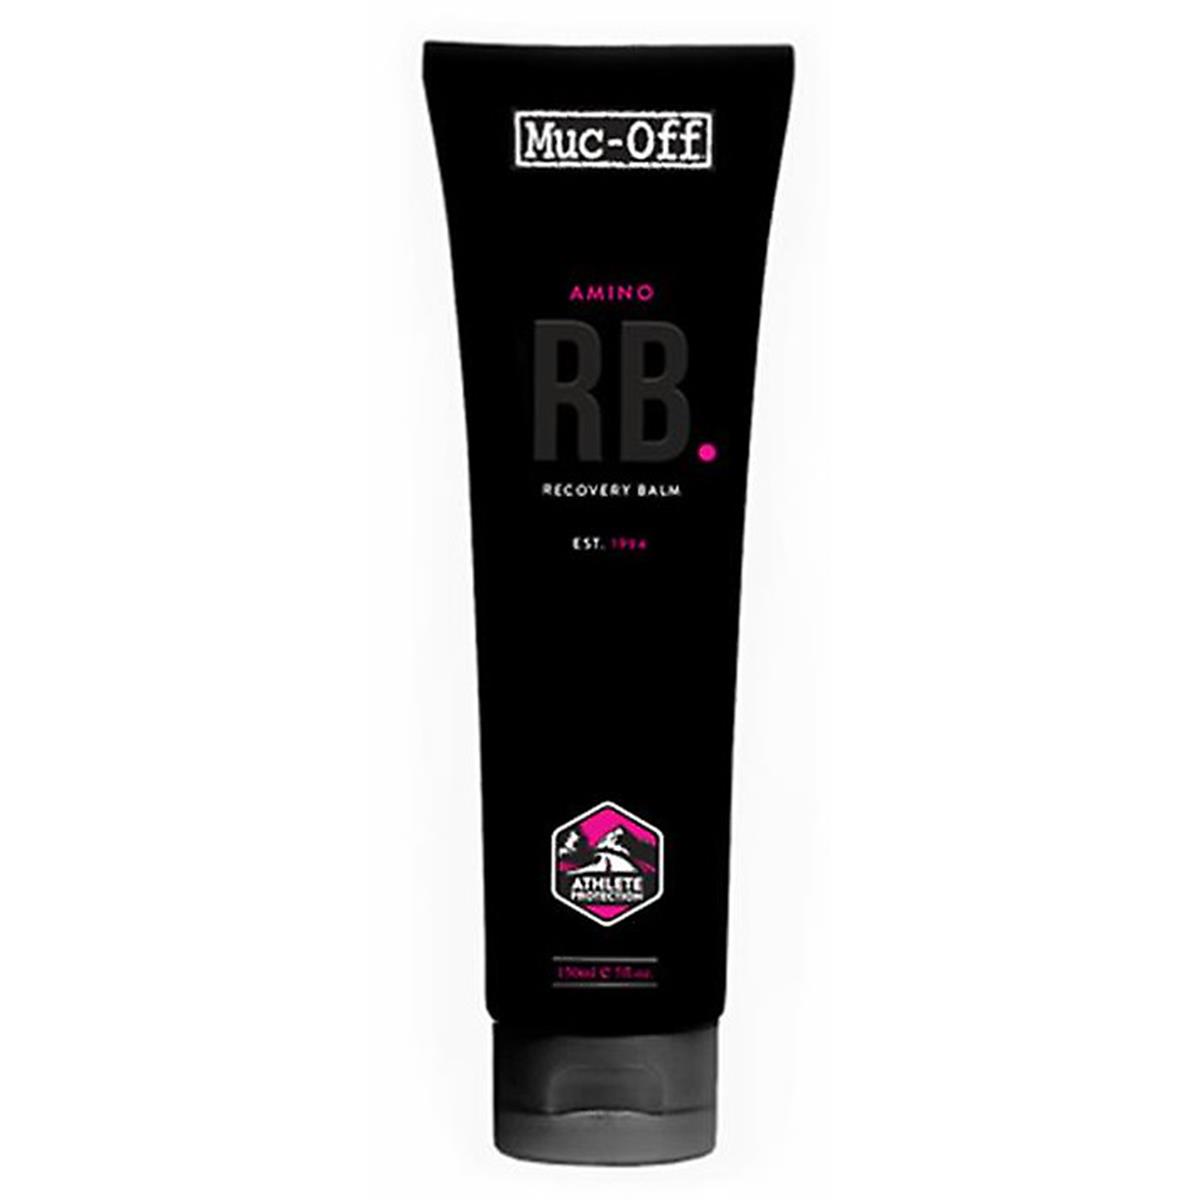 Muc-Off Body Balm Athlete Performance Recovery Tube